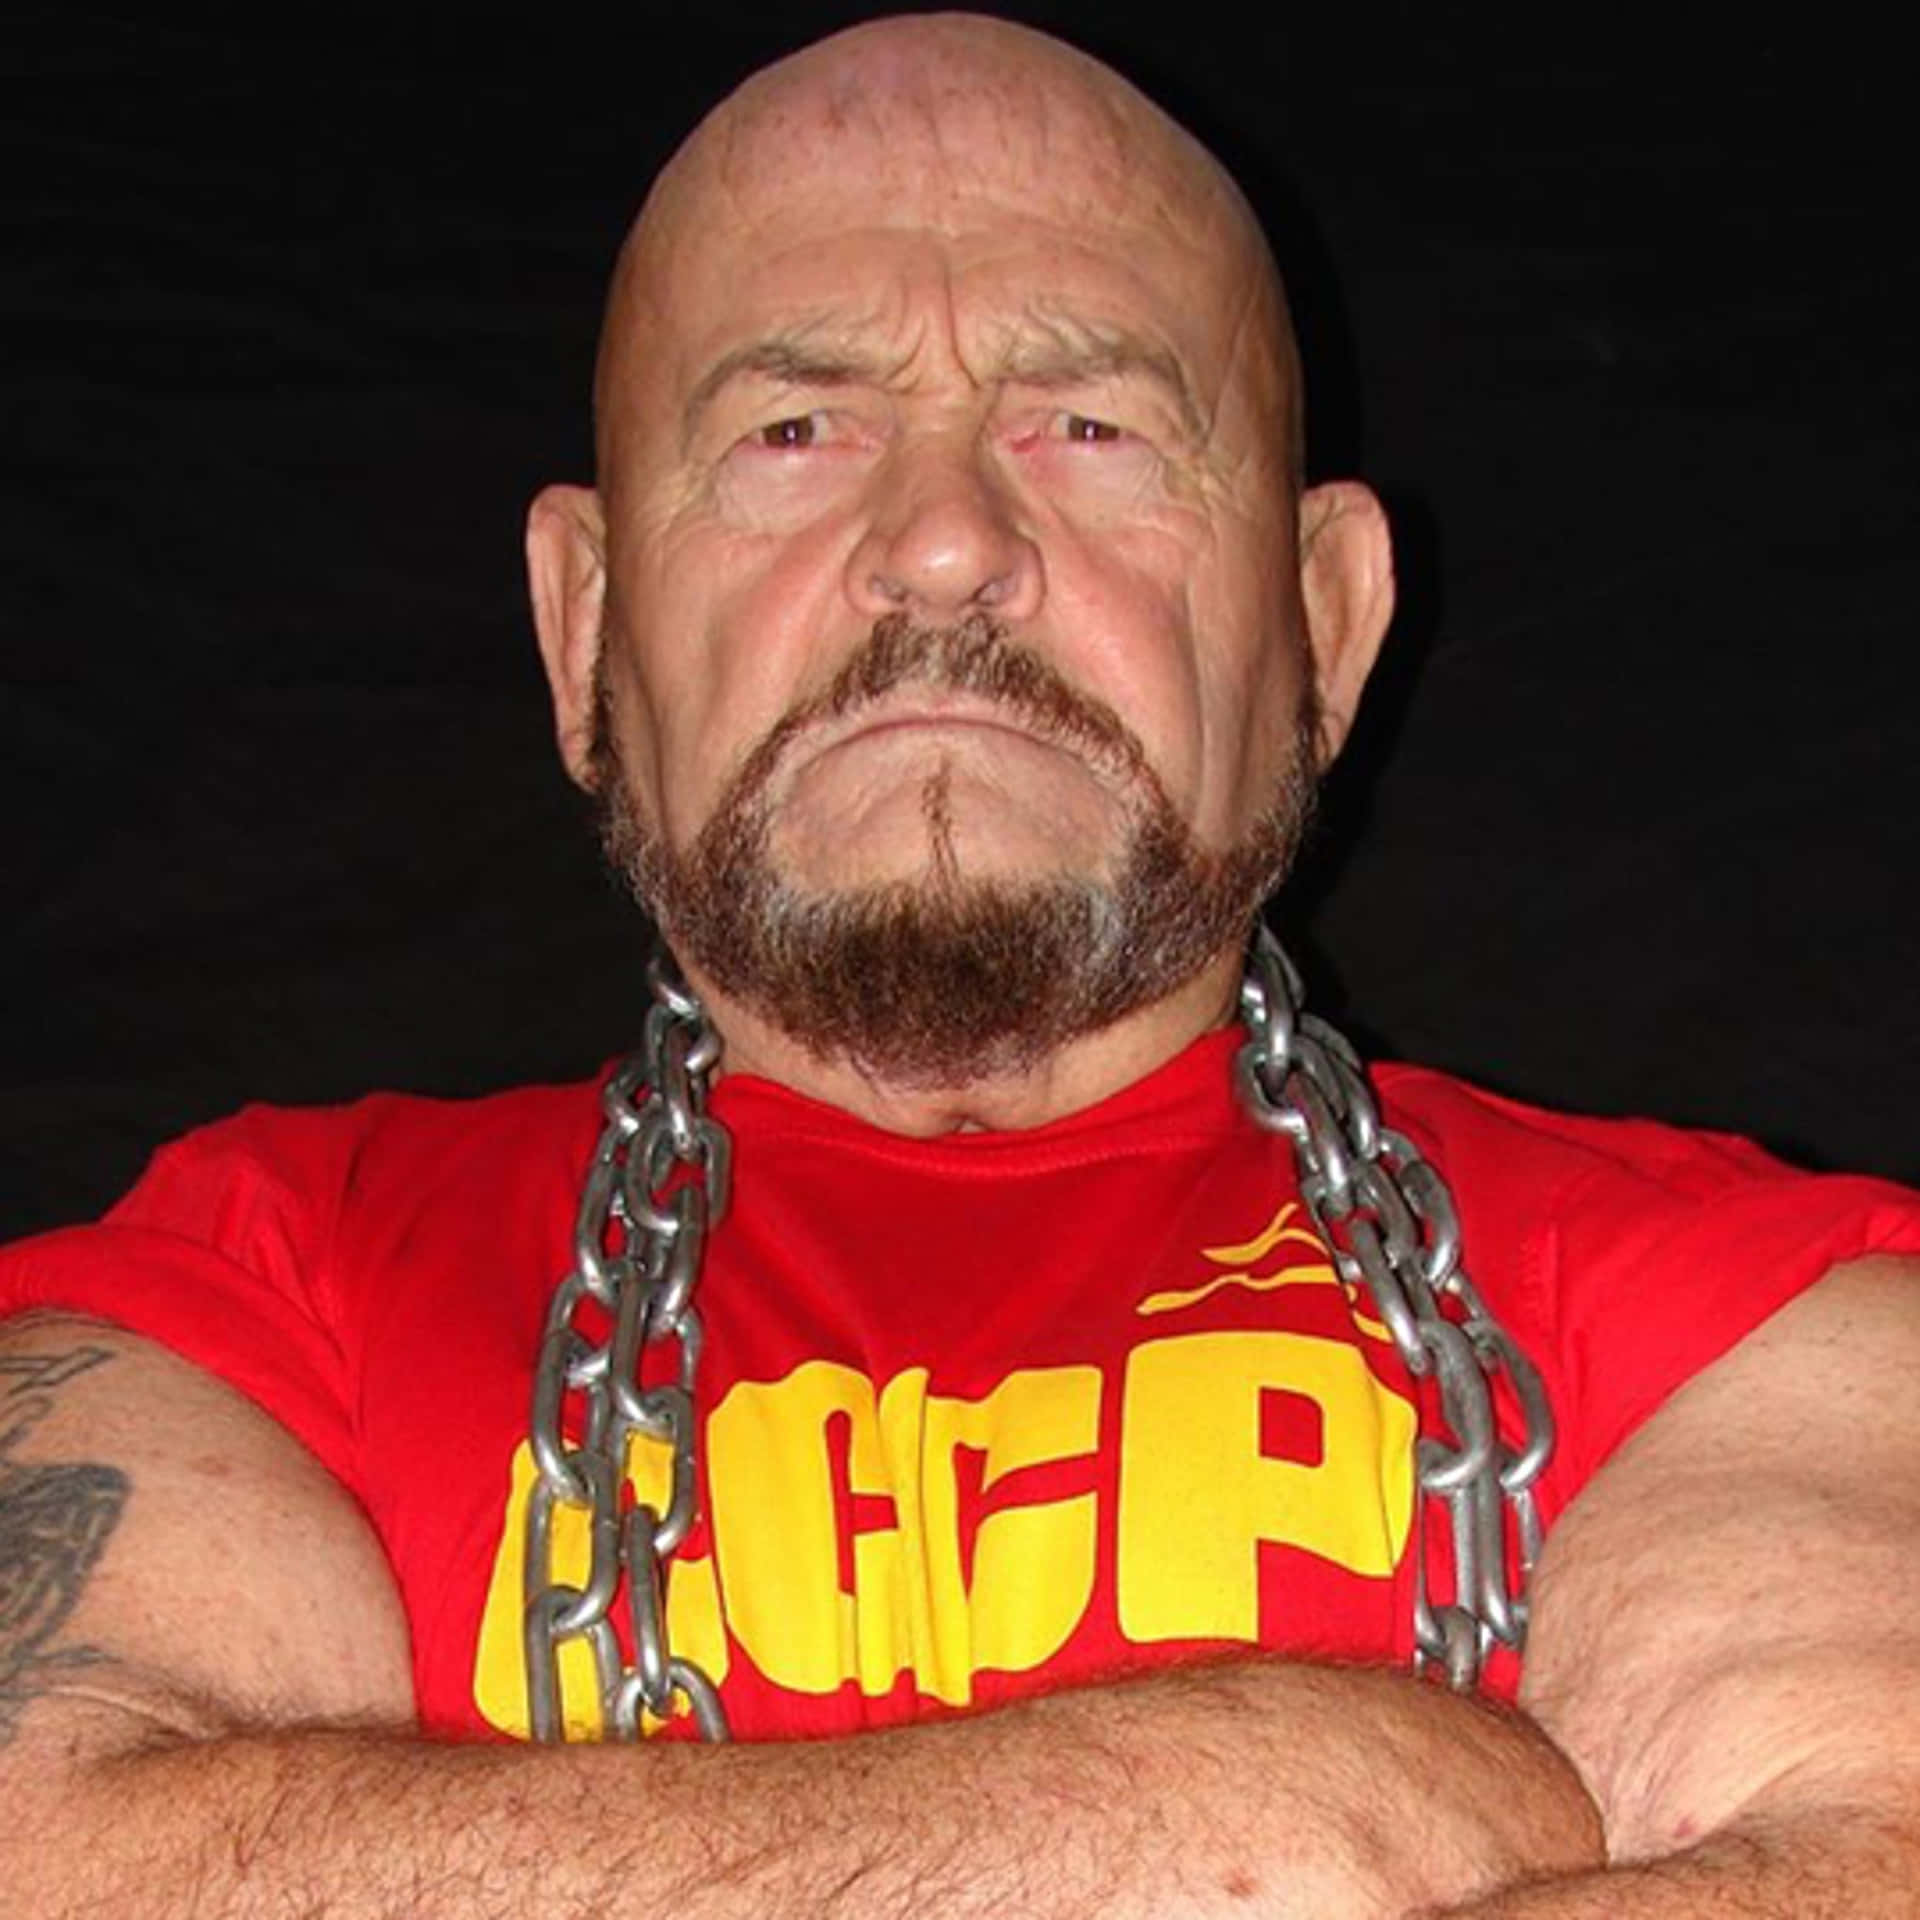 Kanadensiskbrottare Ivan Koloff The Russian Bear. (this Sentence Is Already In English And Doesn't Make Much Sense In Swedish. Can You Provide A Different Sentence For Me To Translate?) Wallpaper